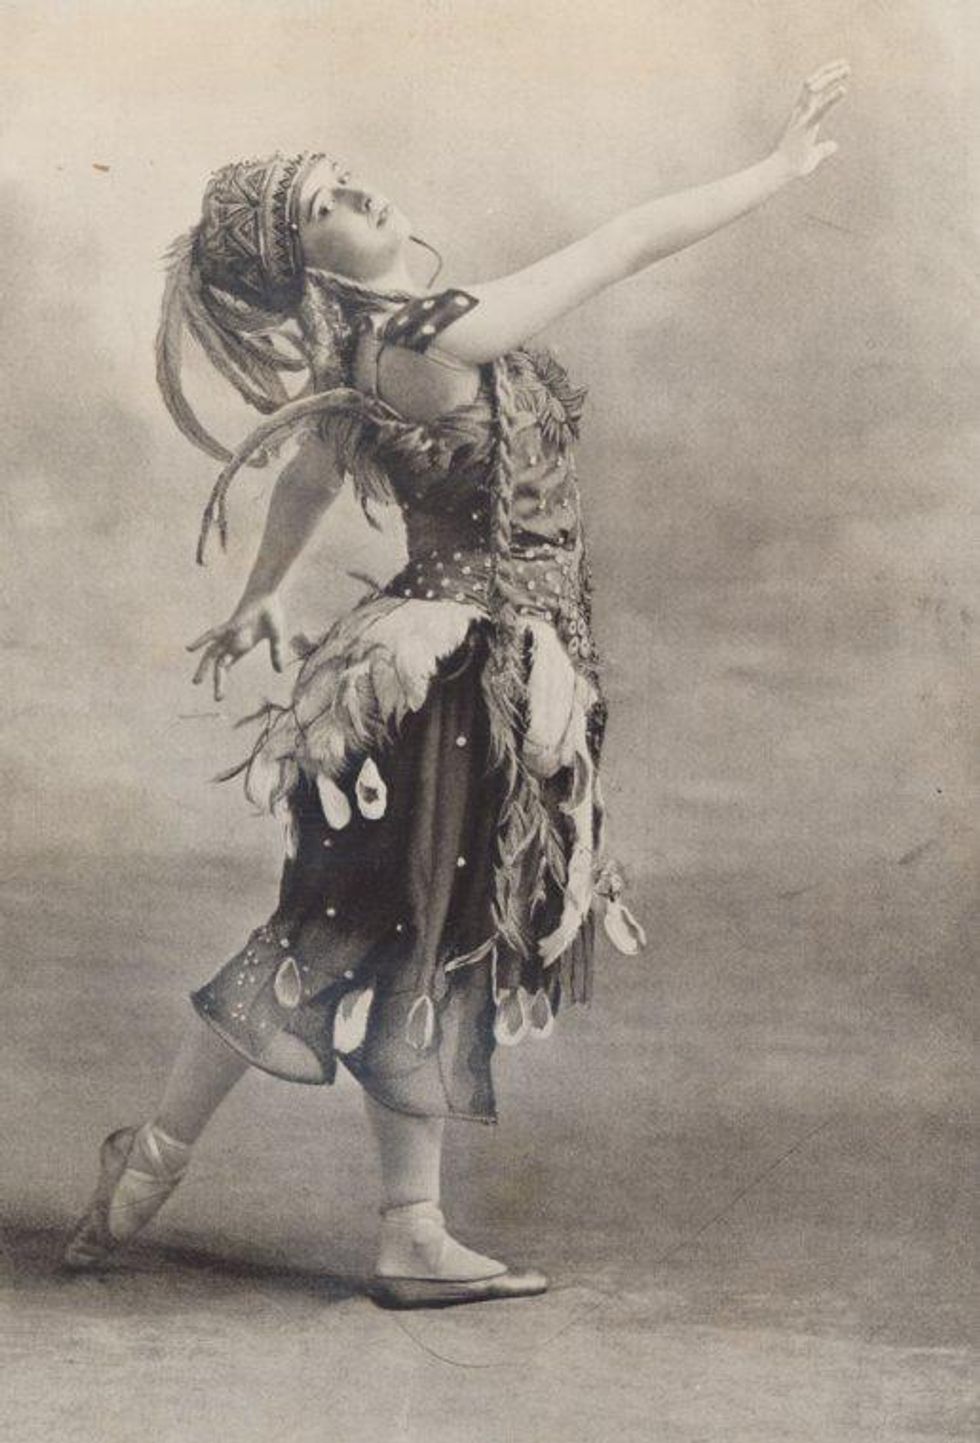 In this antique black-and-white photograph, a ballerina wears a tall feathered hat, an ornate bodice and loose, calf-length pants covered in feathers and sparkly adornments. She stands in profile, in a slightly turned in B+ position and stretches her right arm out in front of her.